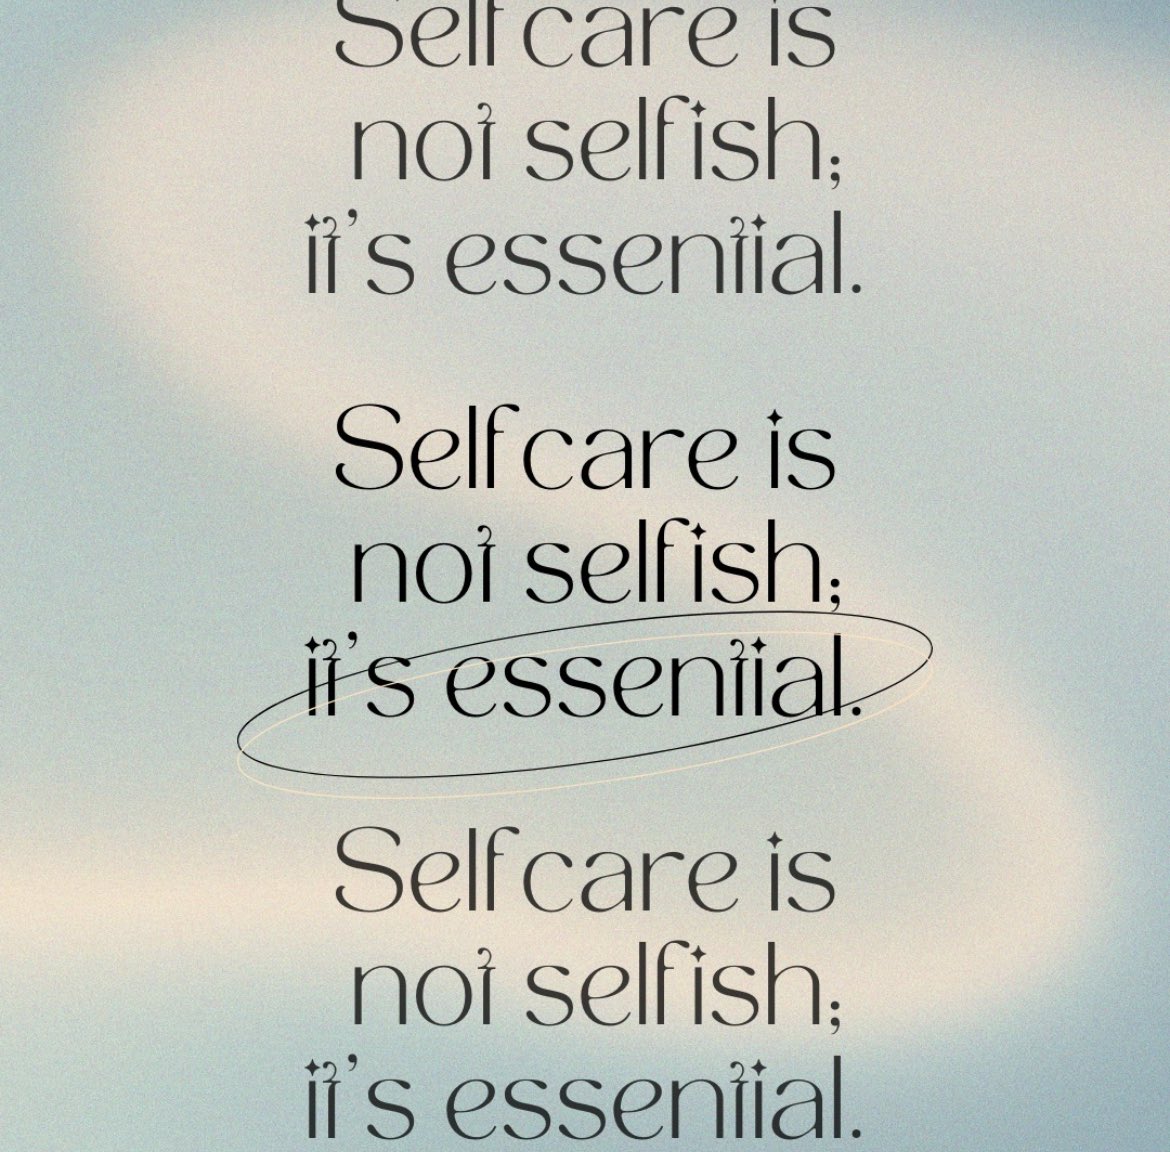 Self care is not selfish its essential.

#WellbeingWednesday